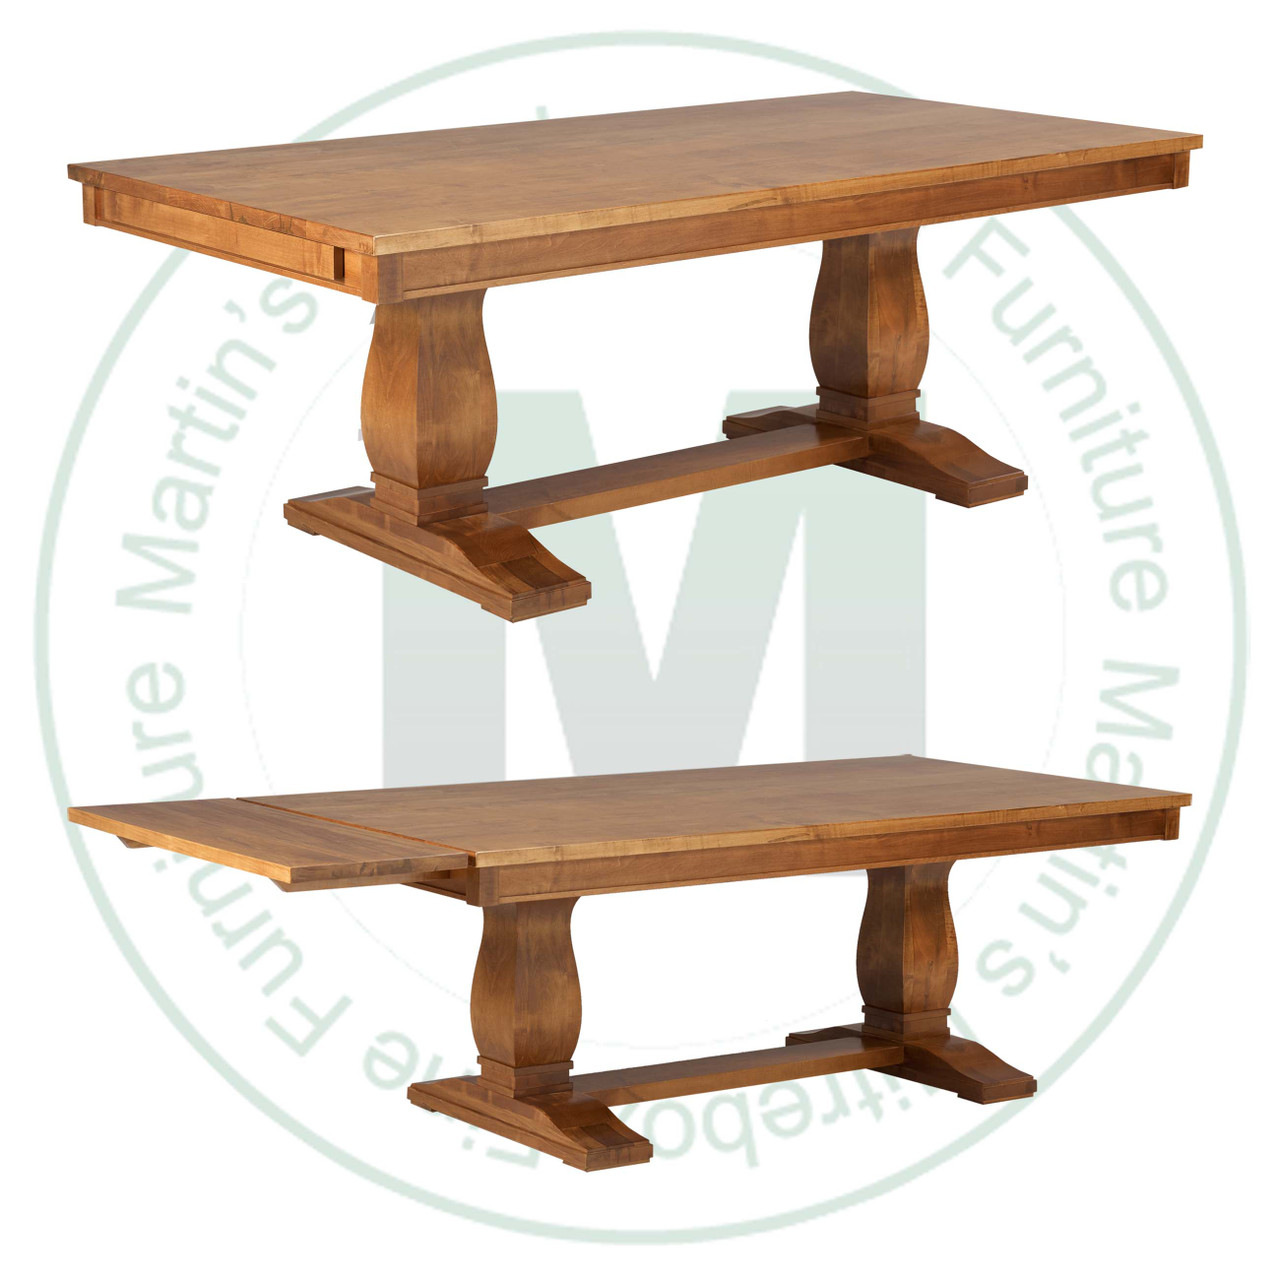 Oak Madrid Solid Top Double Pedestal Table 54''D x 96''W x 30''H With 2 - 16'' Leaves On End Table Has 1.25'' Thick Top